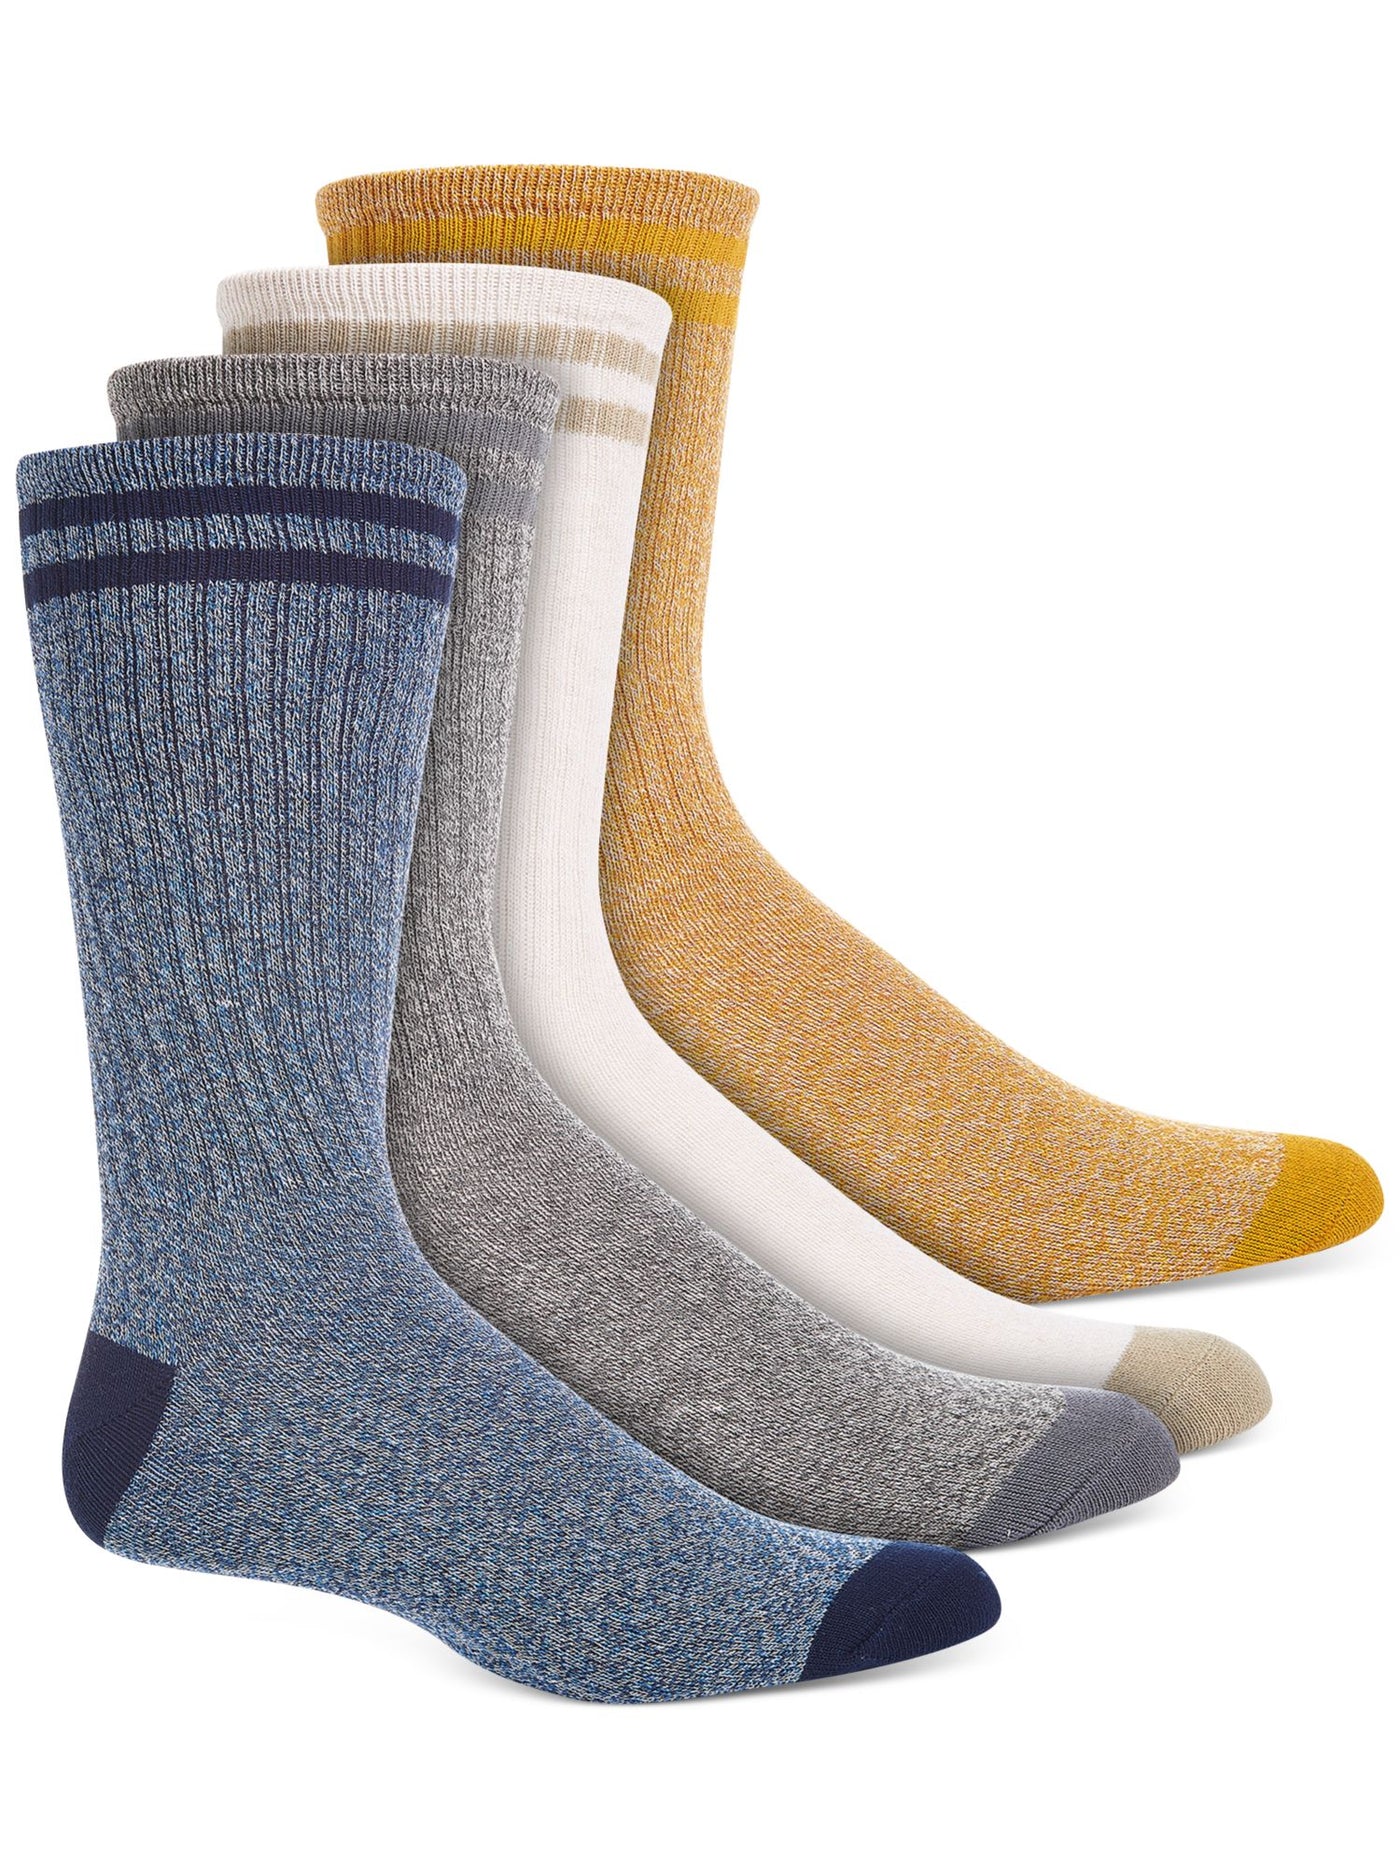 SUN STONE Mens 4 Pack Yellow Double Stripe Stretch Ribbed Casual Crew Socks 7-12